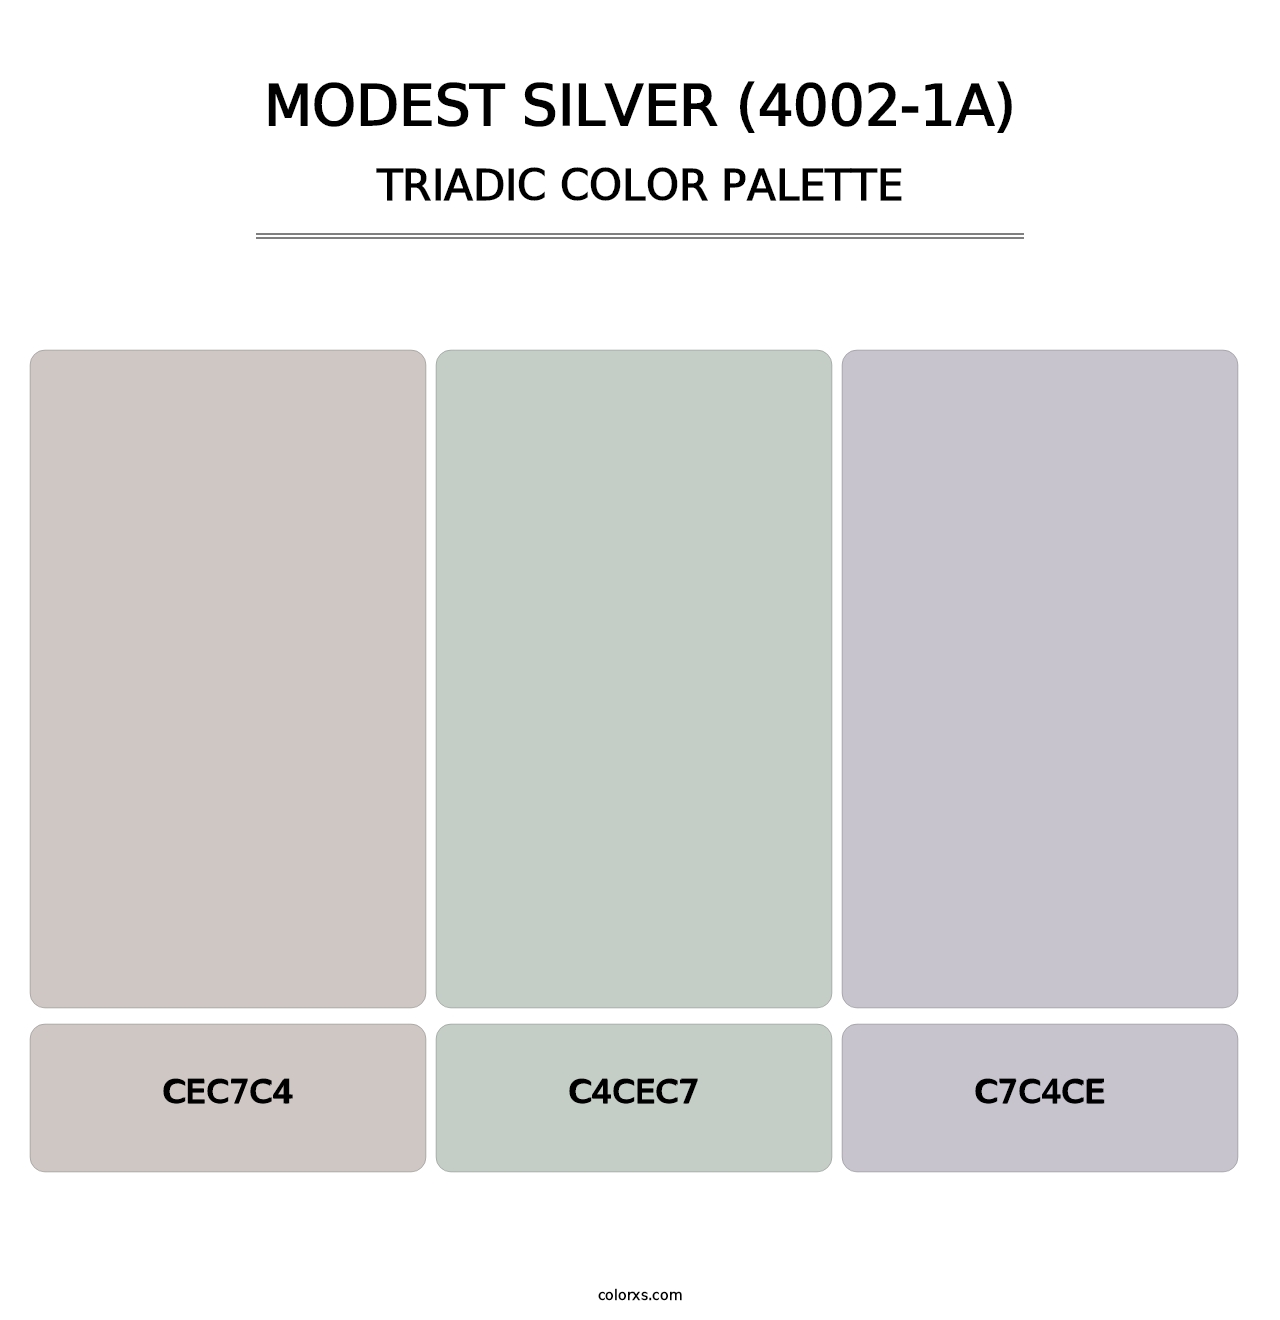 Modest Silver (4002-1A) - Triadic Color Palette